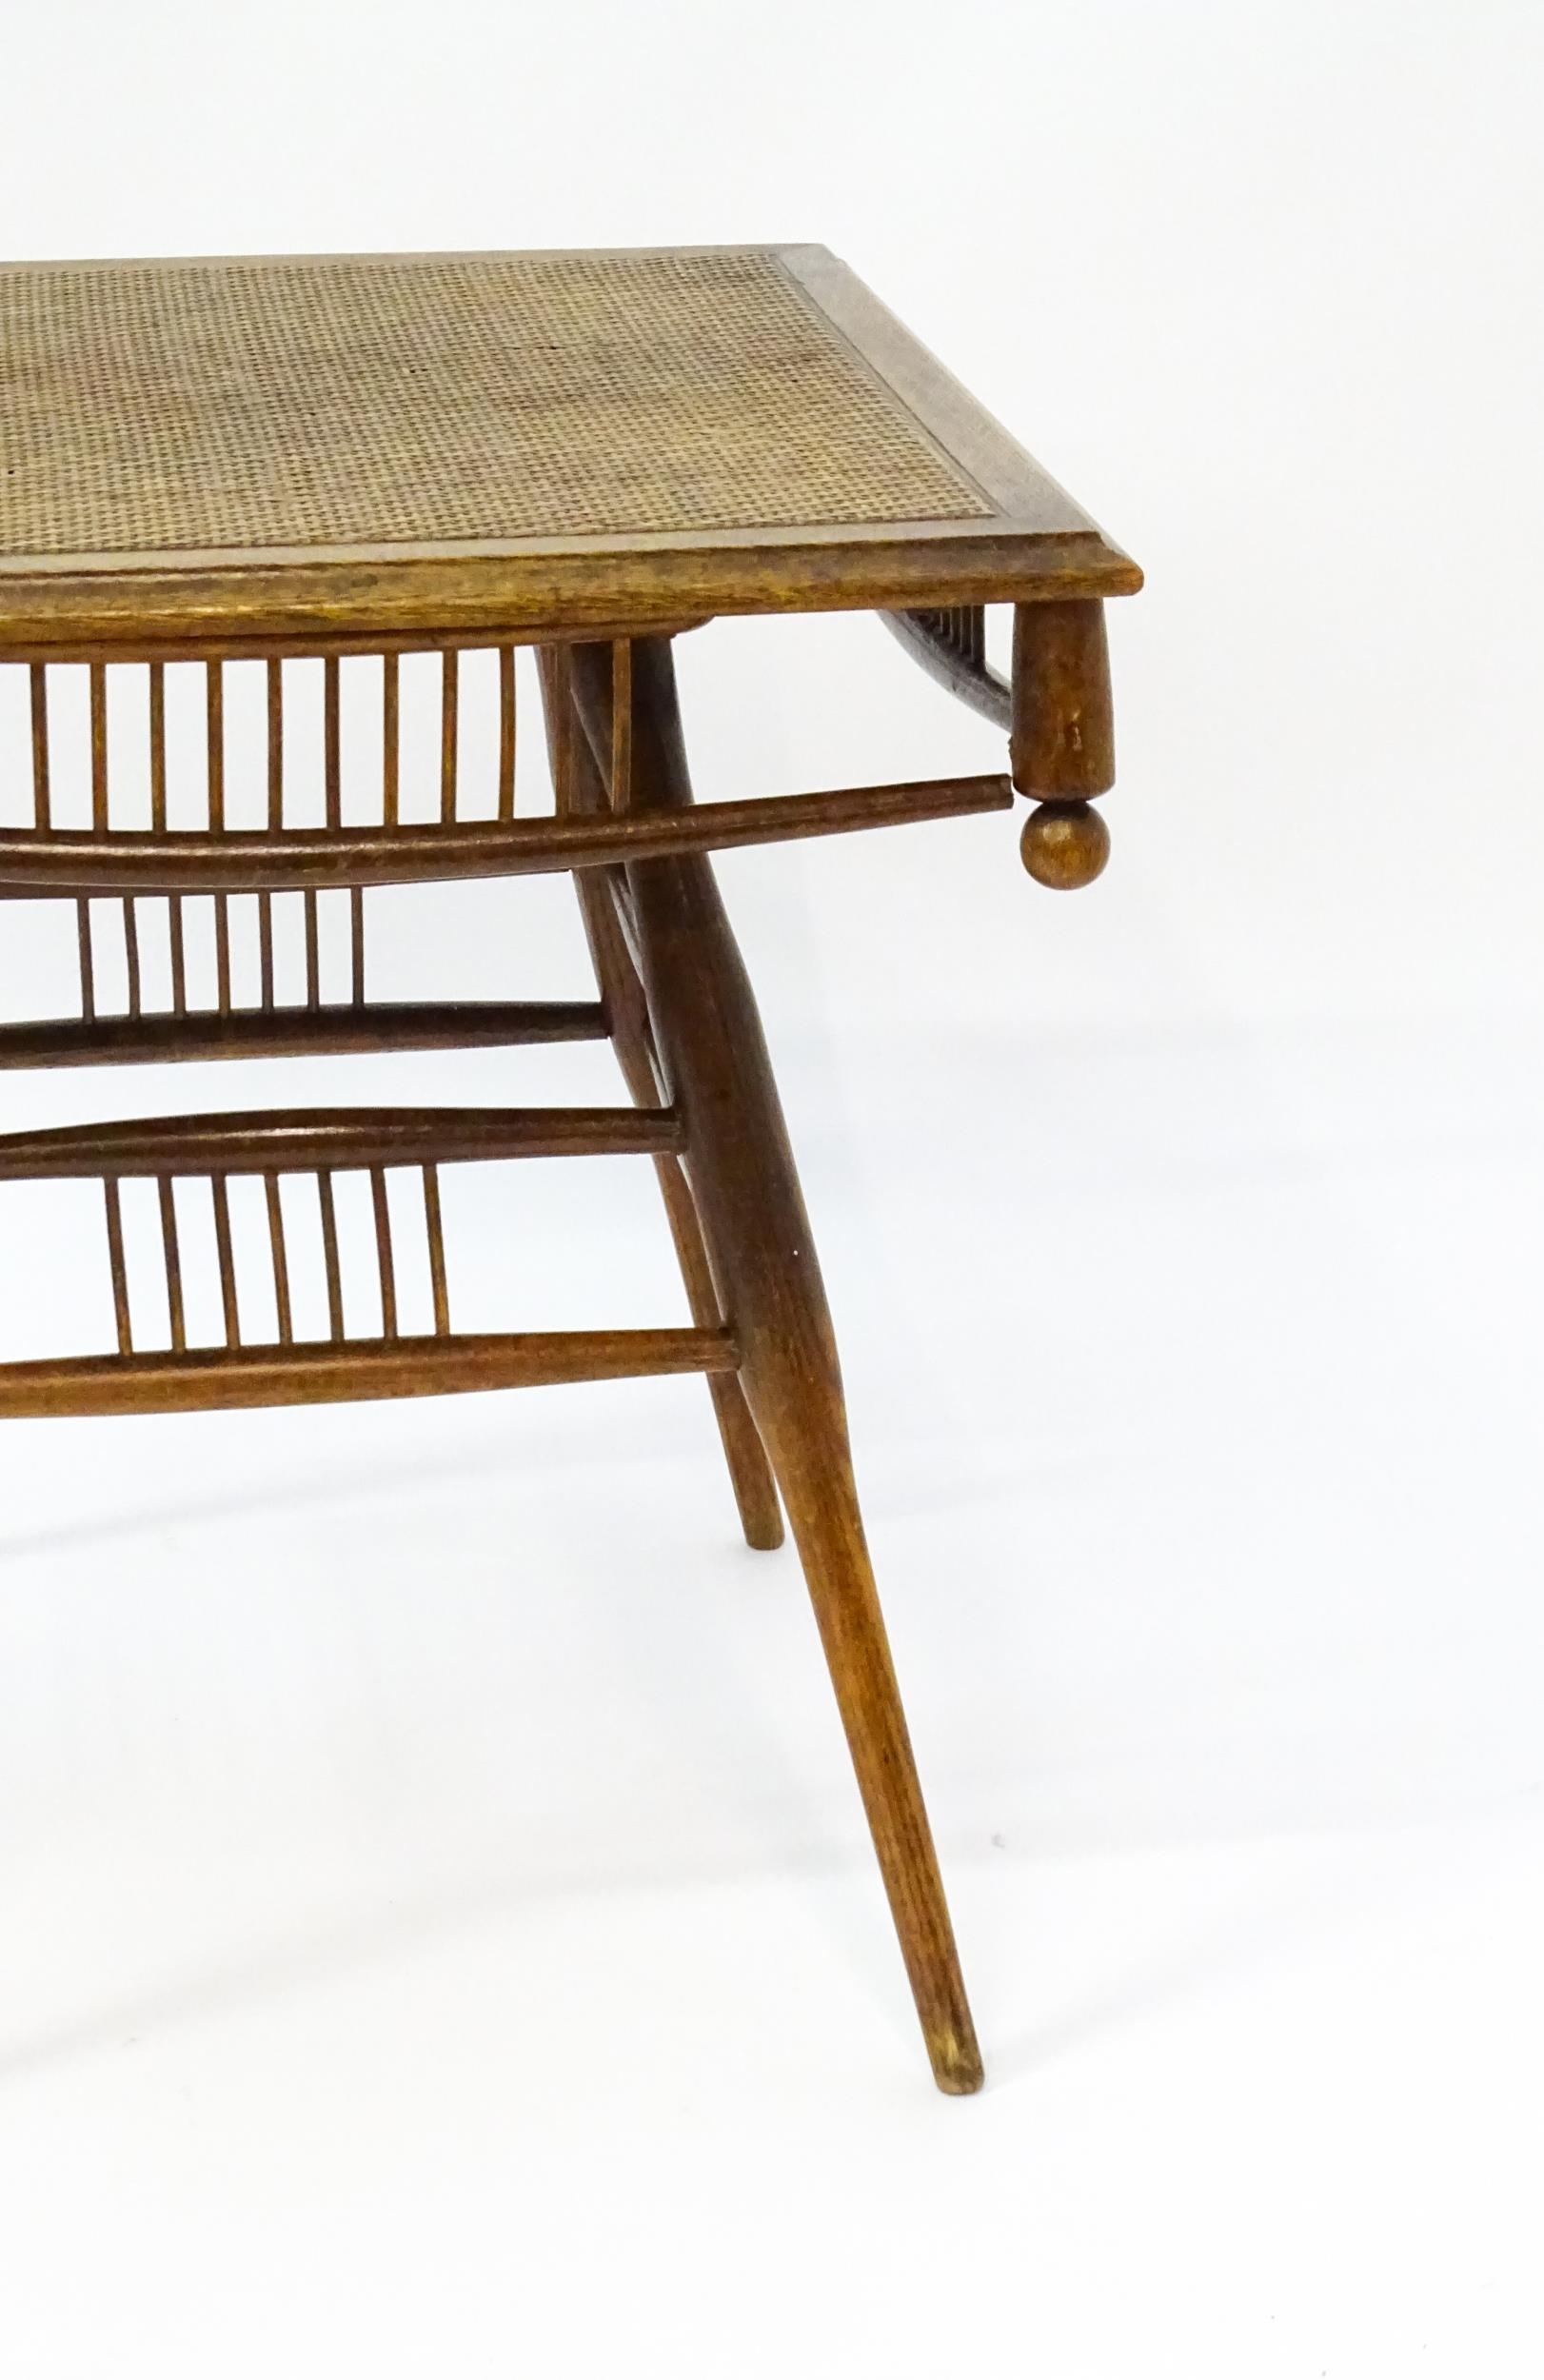 An unusual late 19thC Arts & Crafts table with a rattan inlaid moulded top above three tiers of - Image 2 of 10